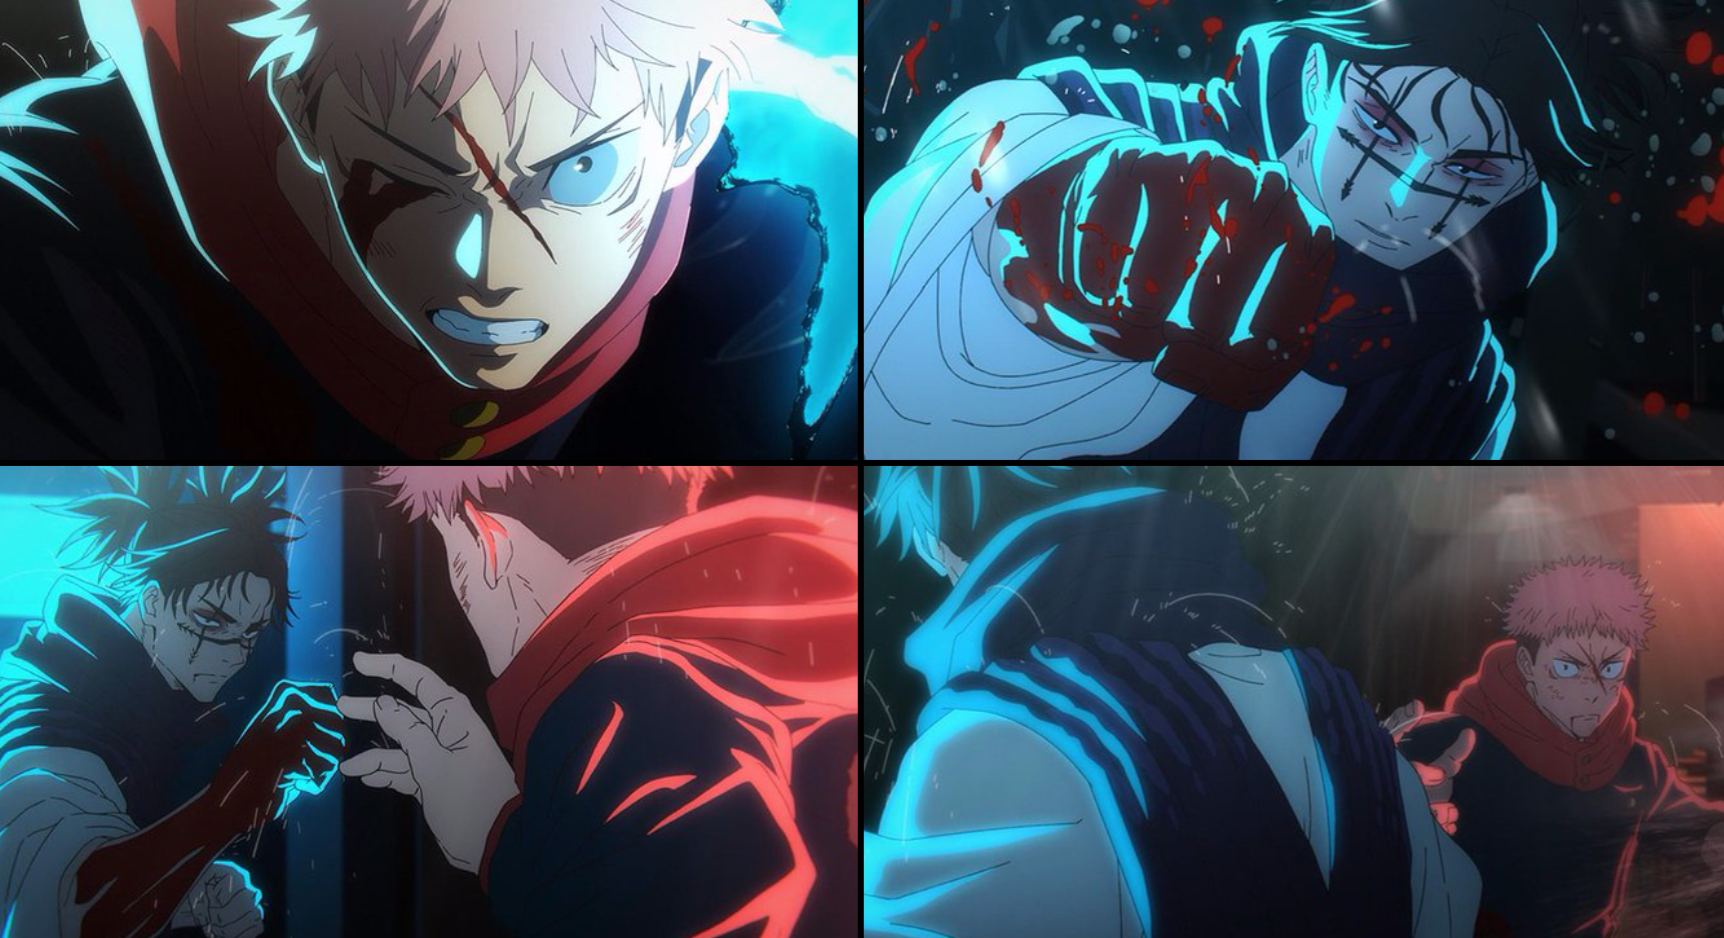 jujutsu kaisen season 2: Jujutsu Kaisen Season 2 Episode 13: The